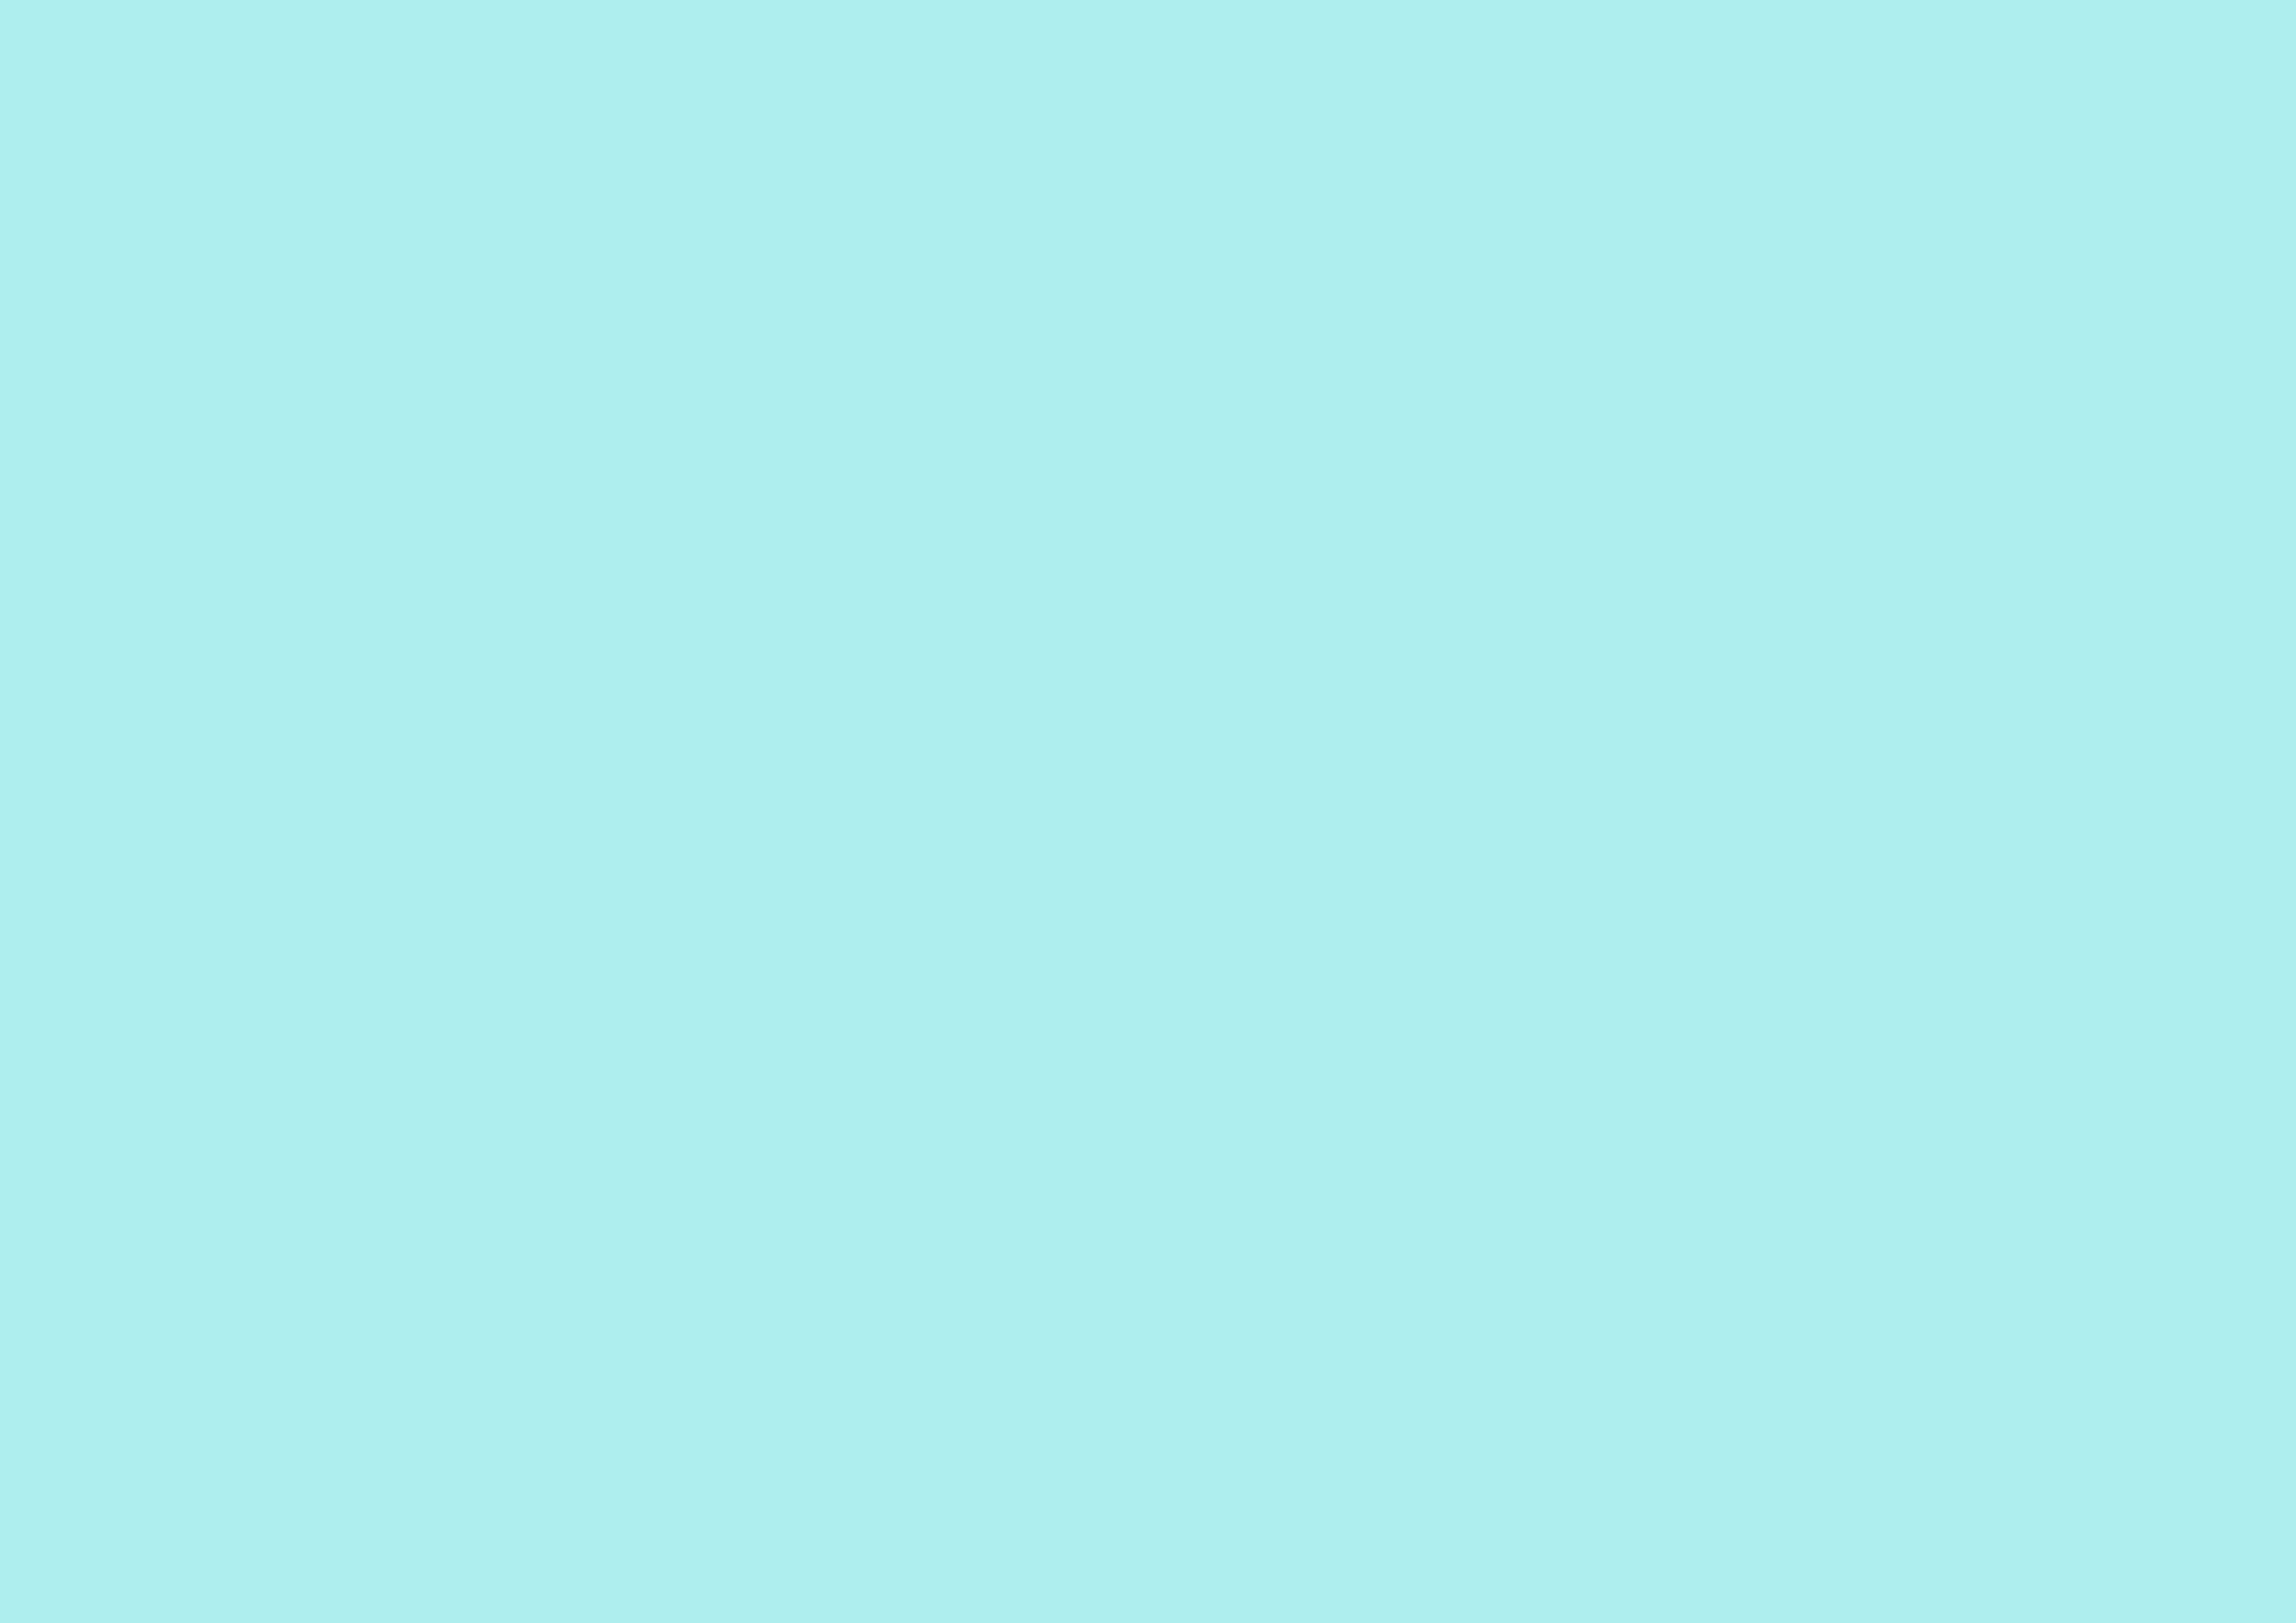 3508x2480 Pale Turquoise Solid Color Background